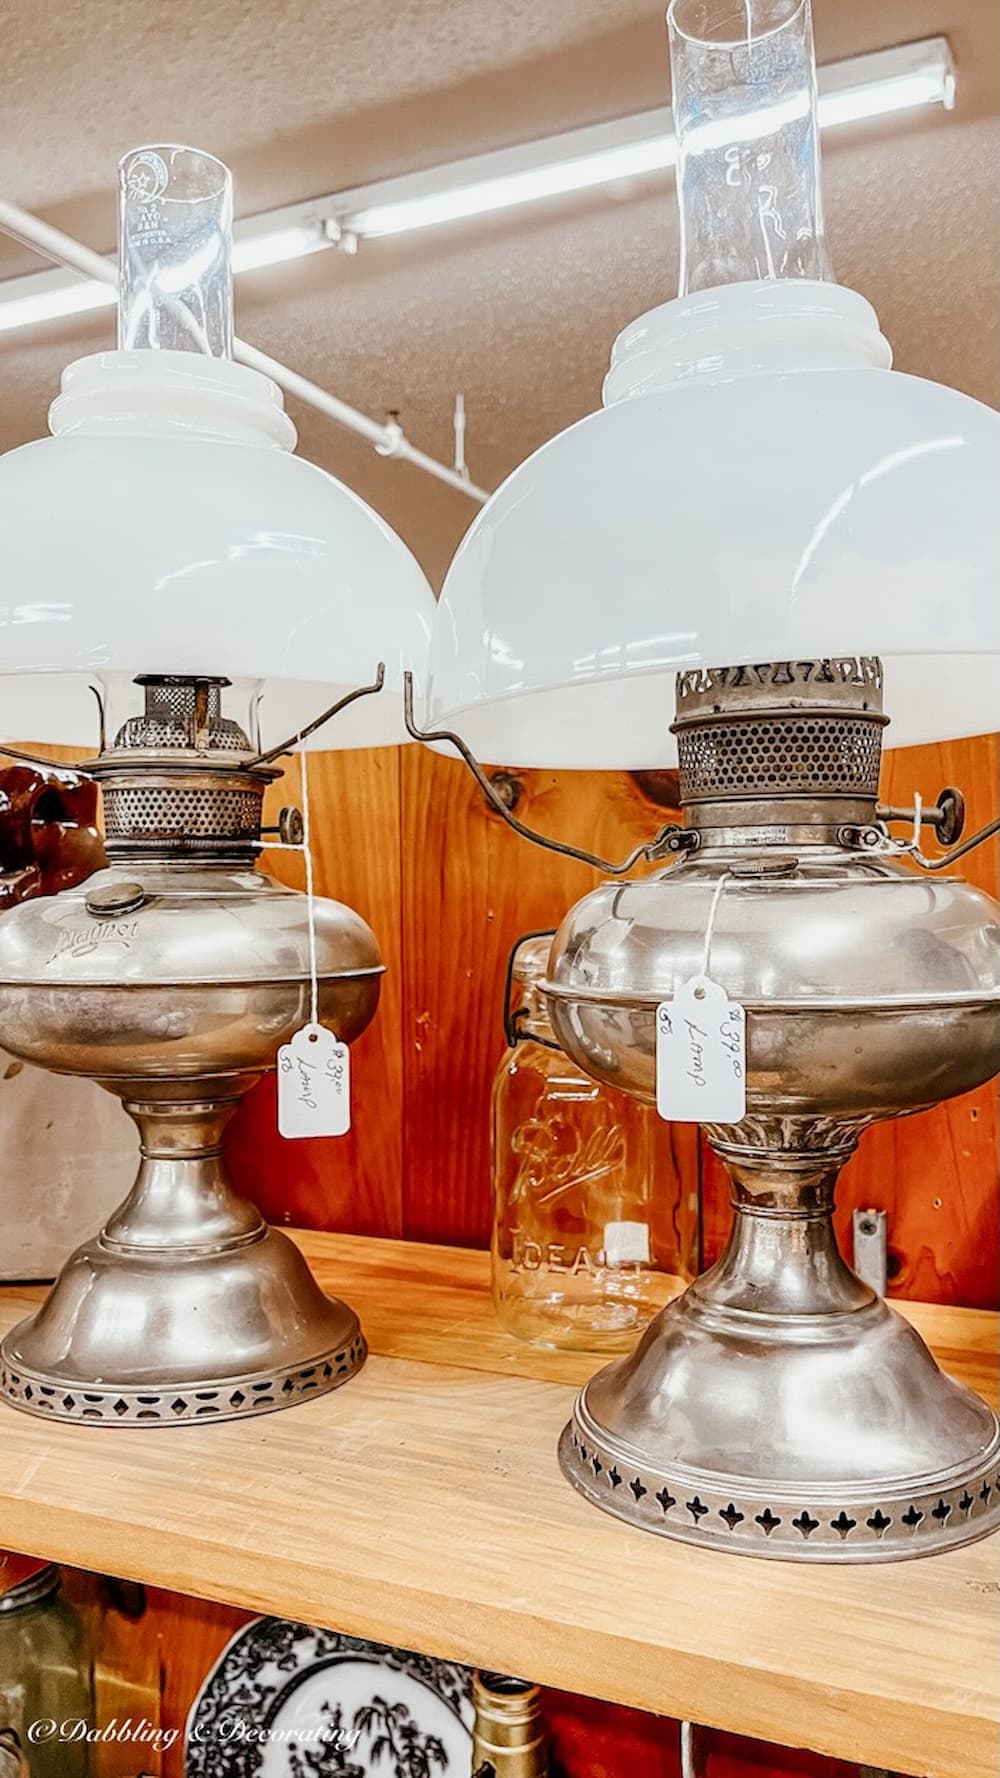 Pewter Lamps